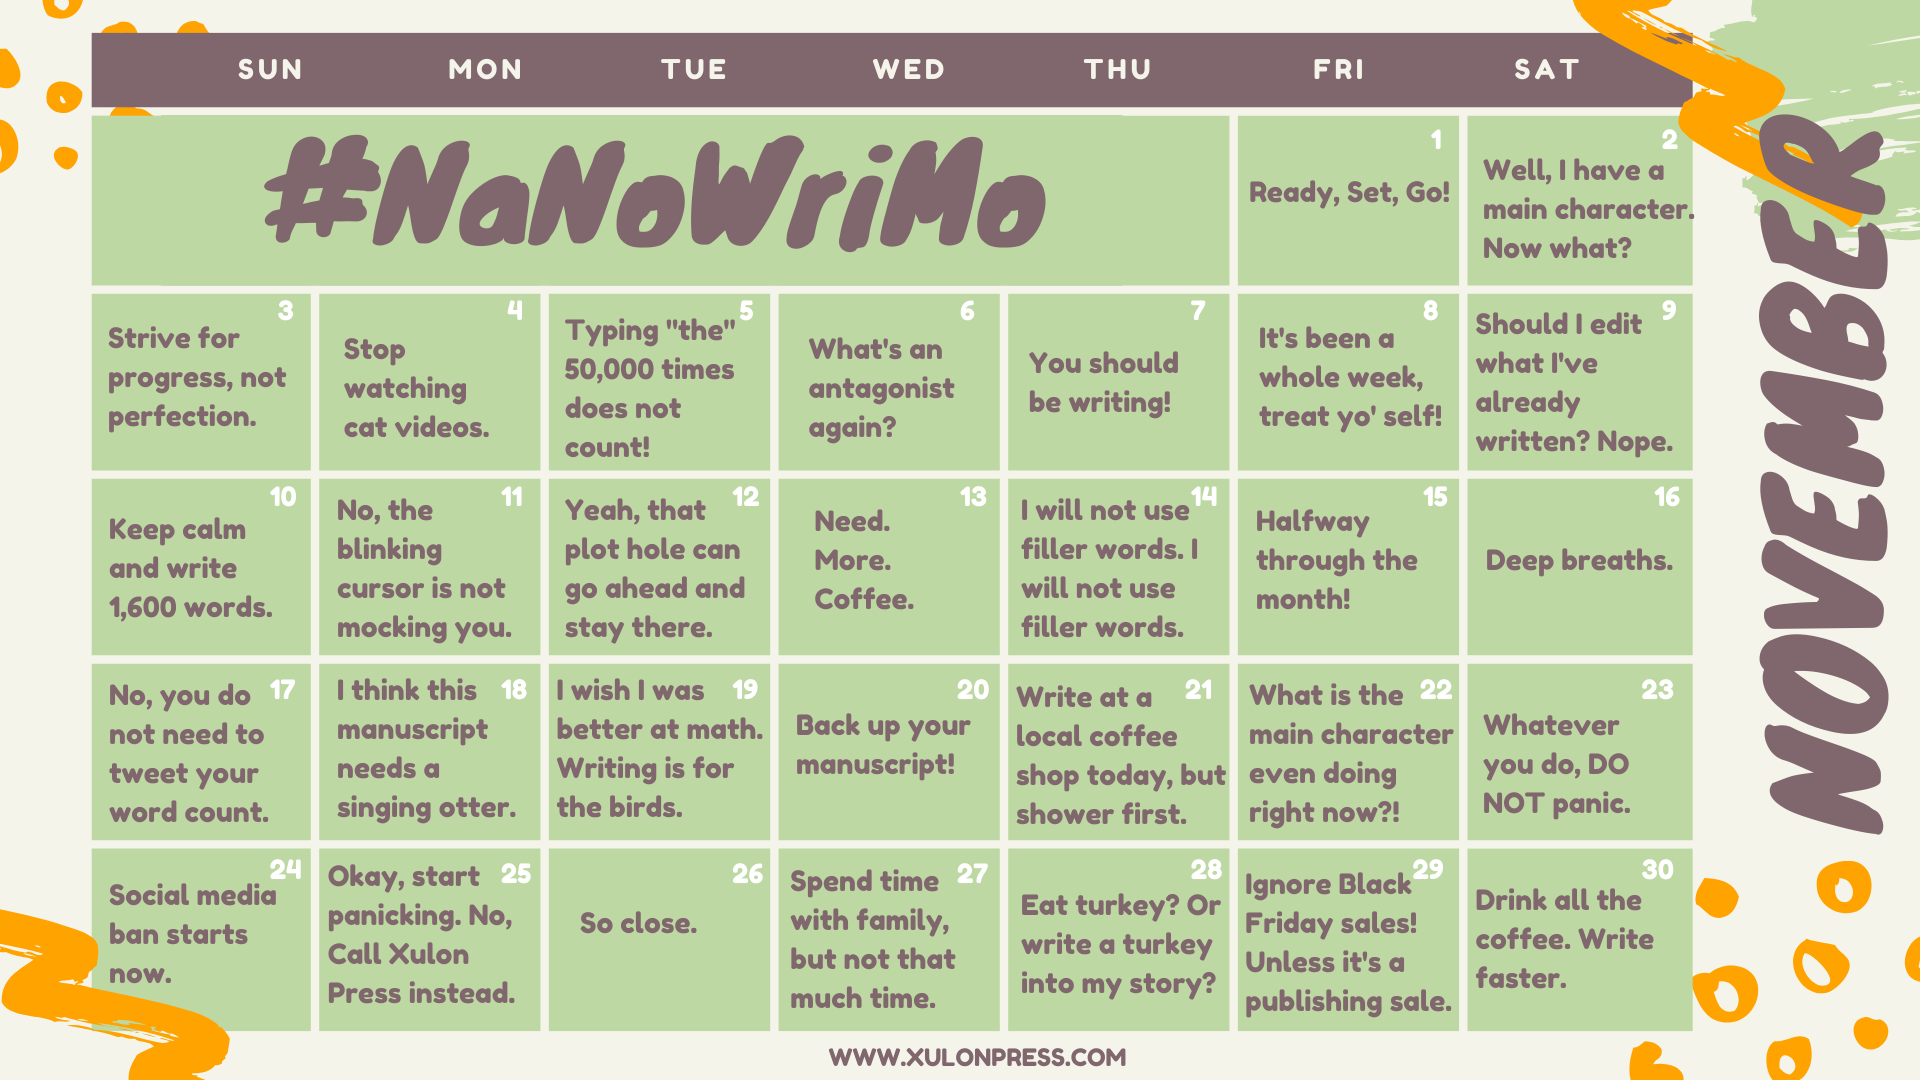 Happy National Novel Writing Month! Will you be participating in the challenge and writing a 50,000-word manuscript for NaNoWriMo?